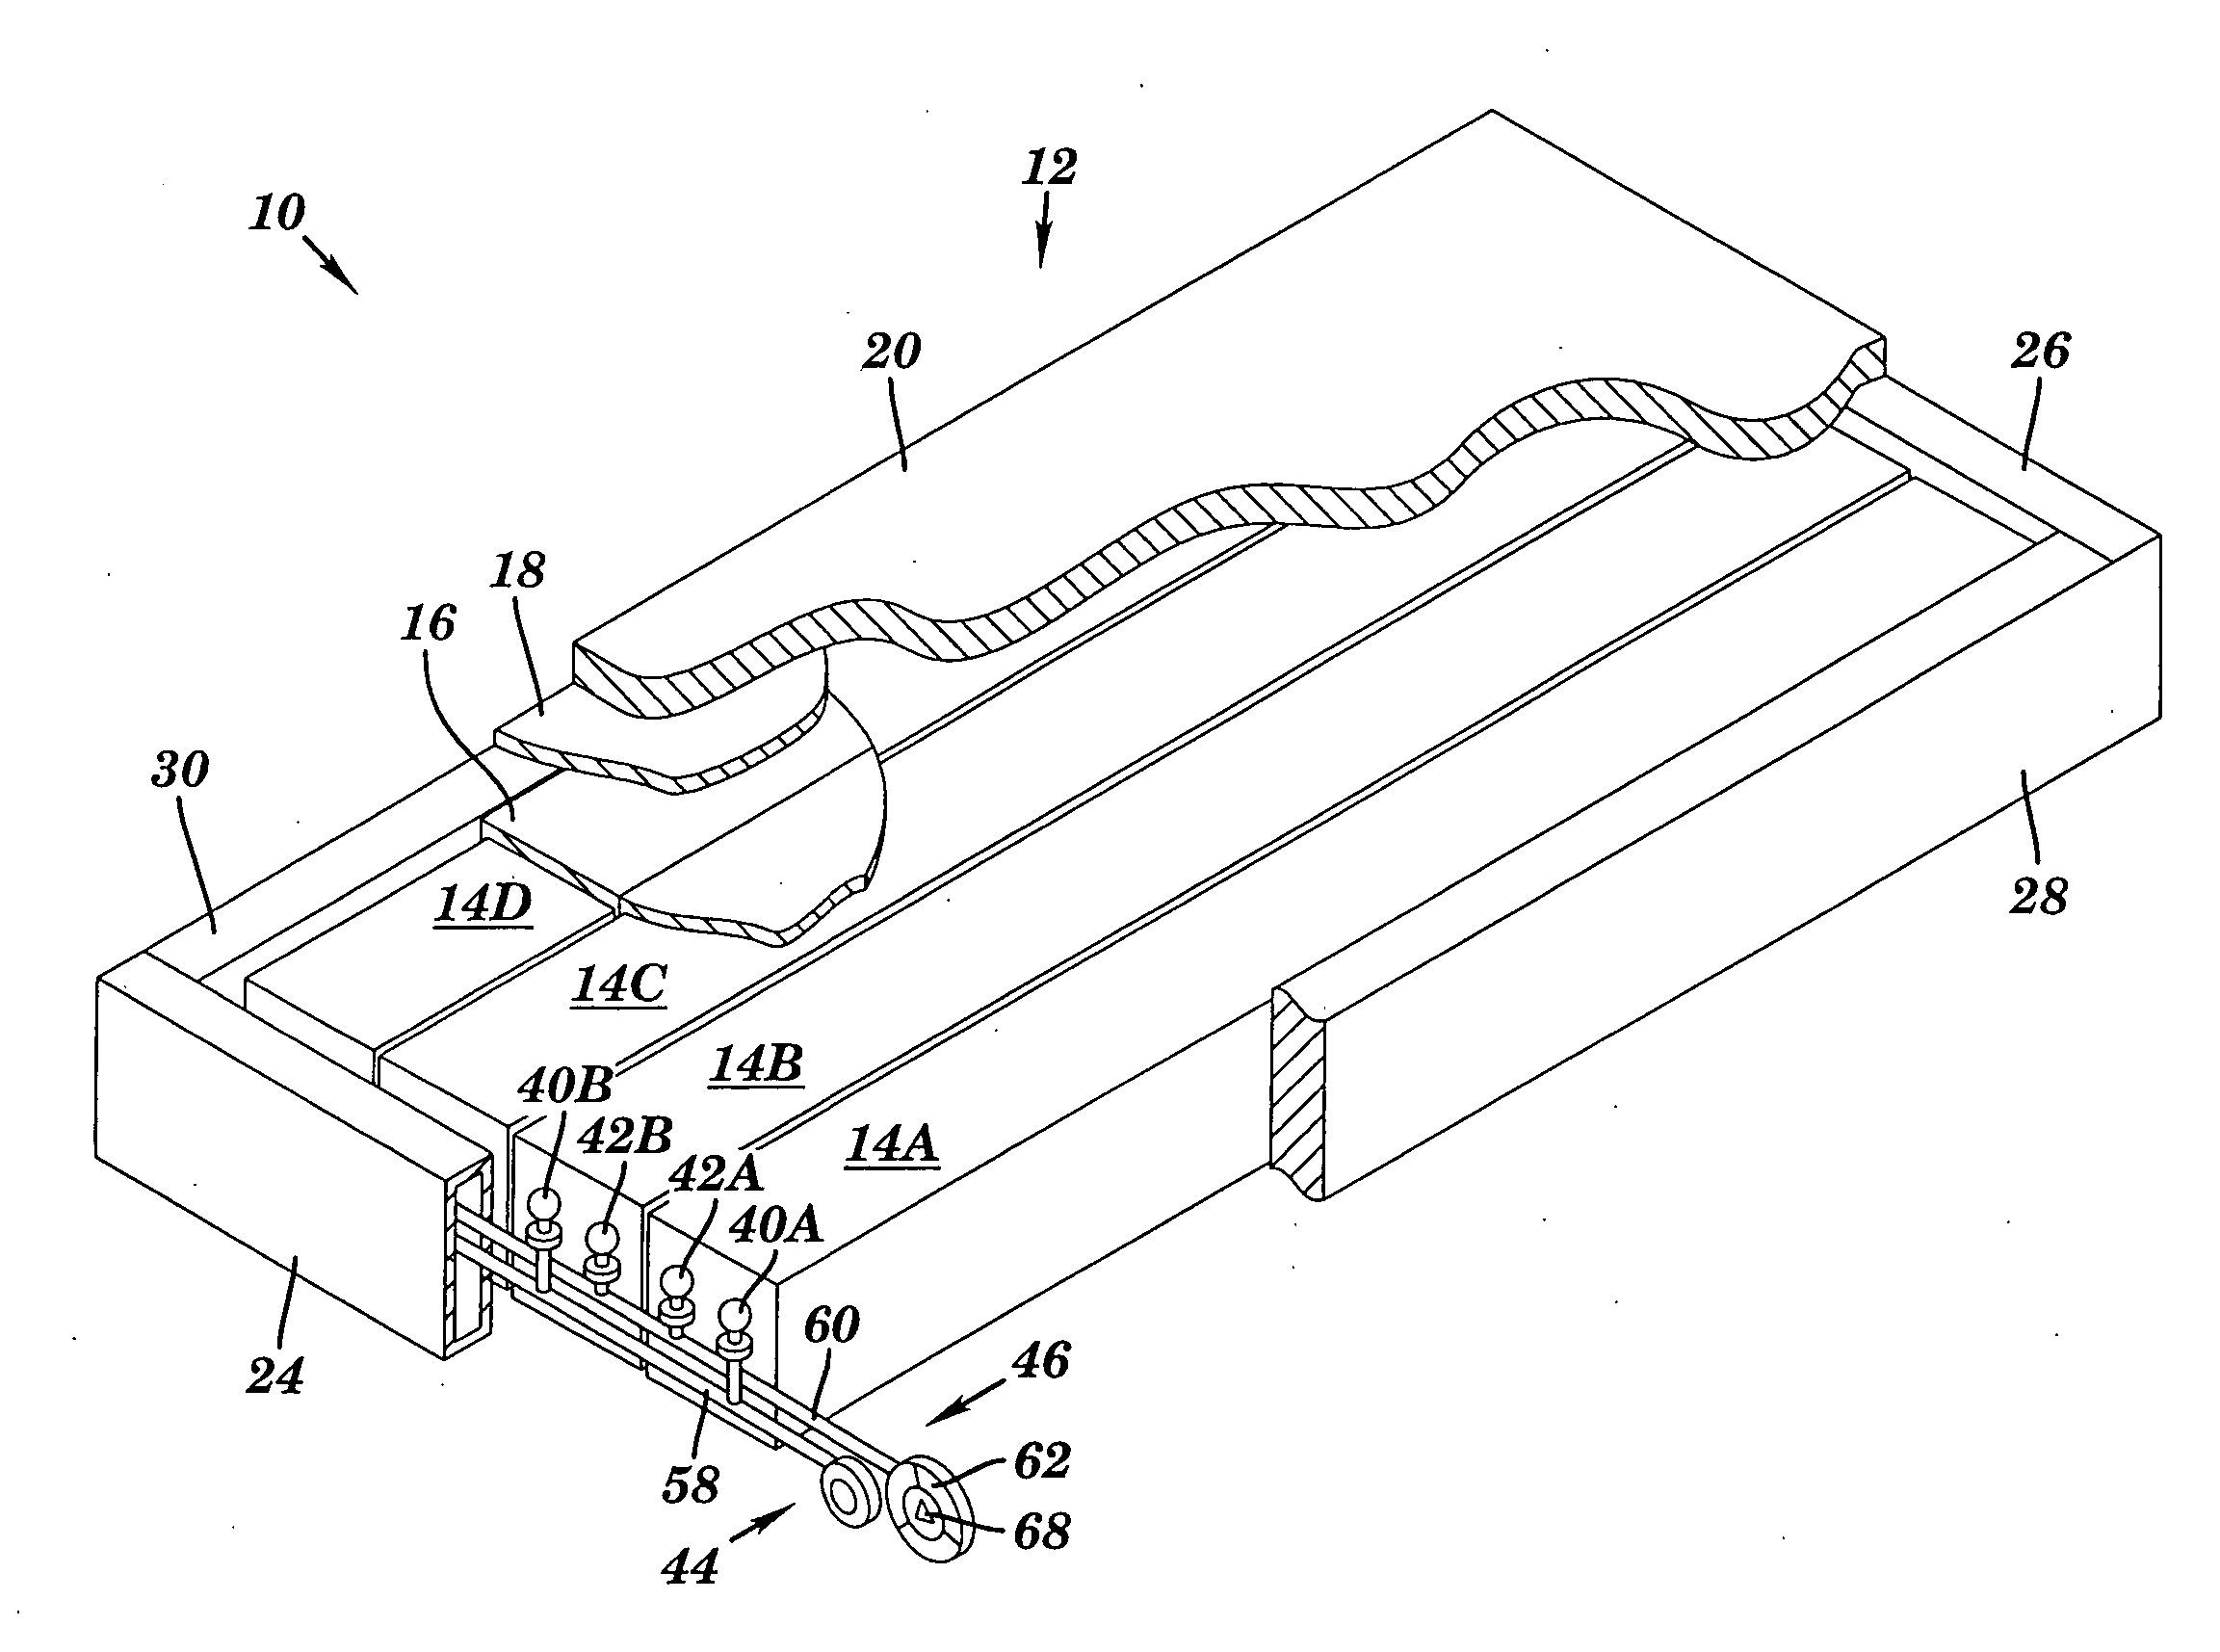 Inflatable cushioning device with manifold system